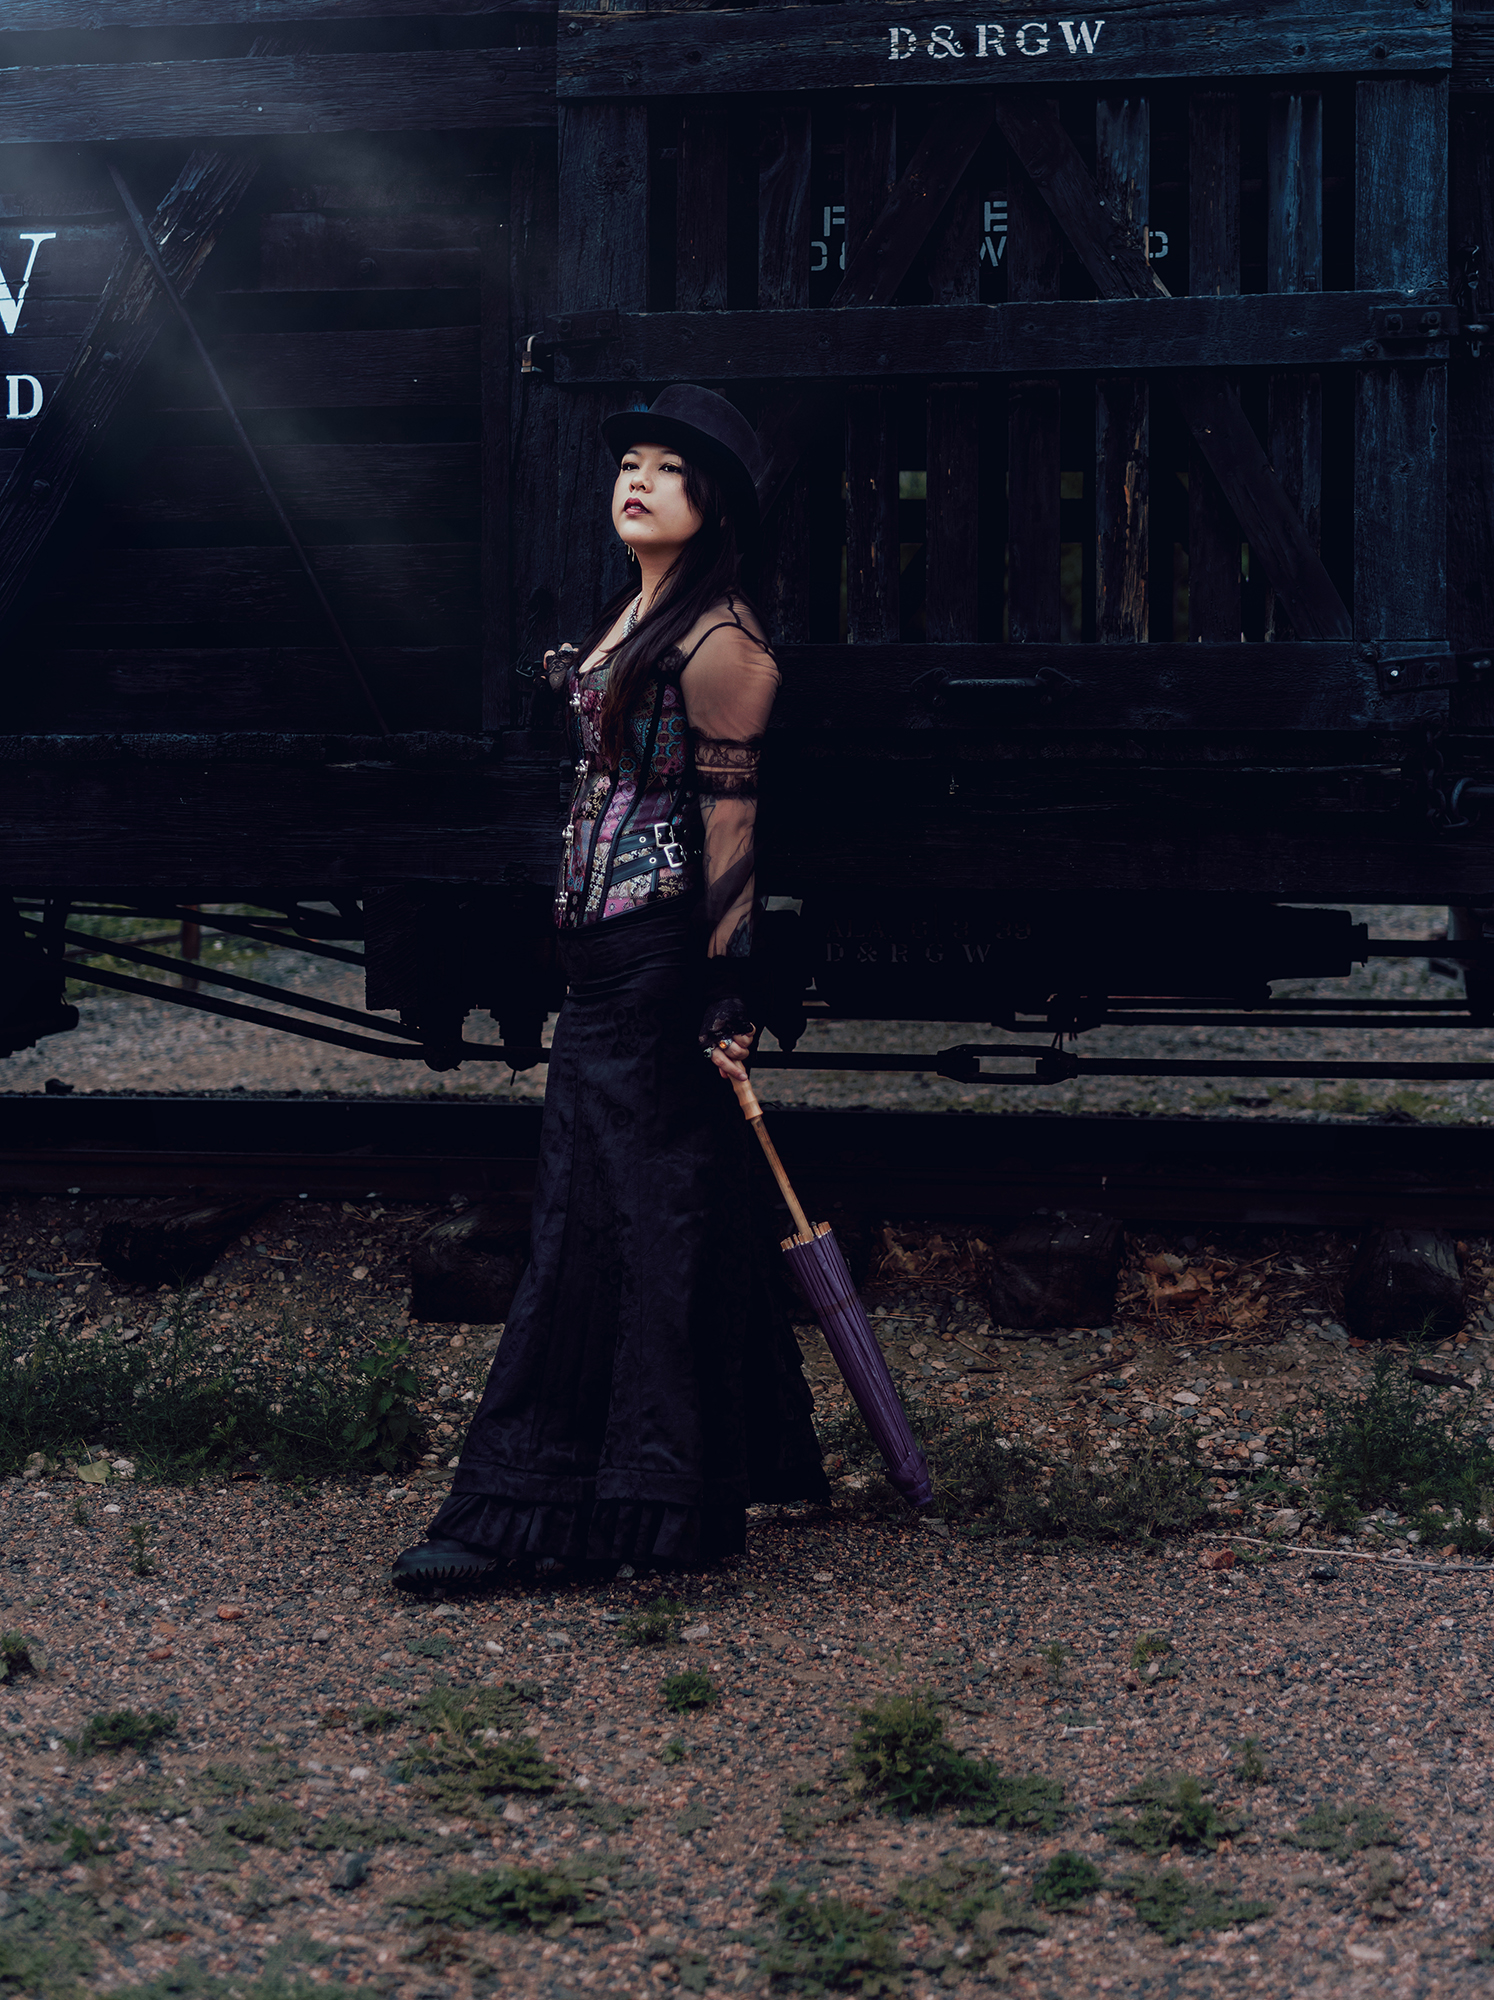 A woman standing next to a wooden train car wearing a Victorian style steampunk outfit and holding a purple parasol